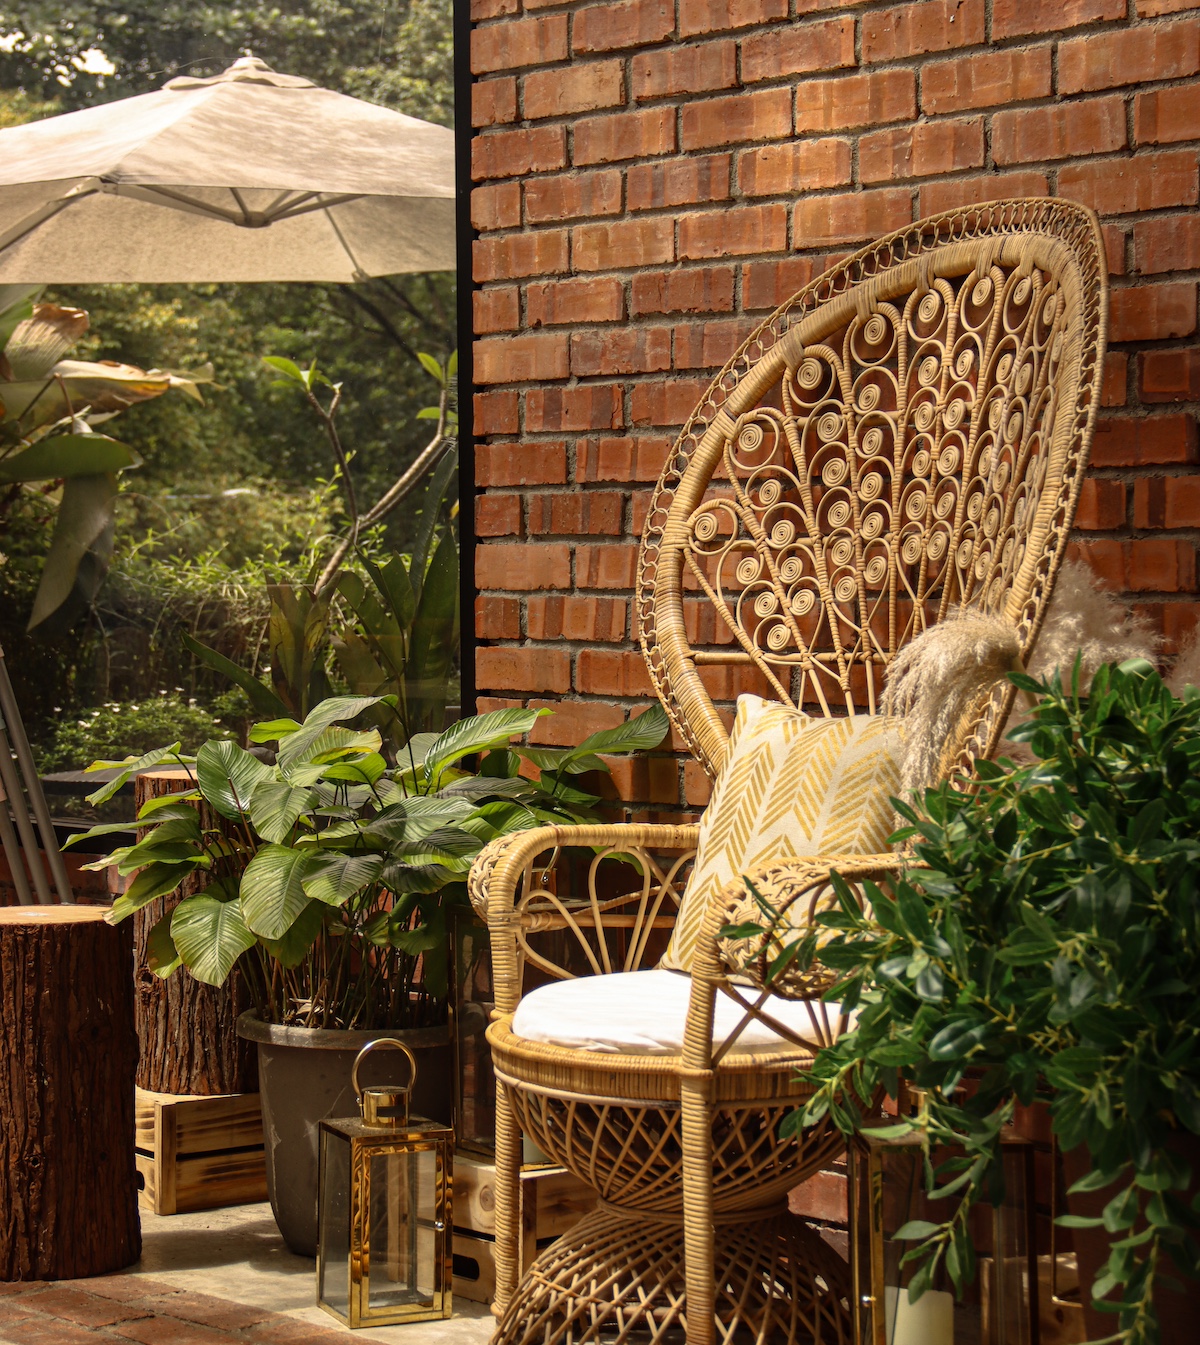 How to Care for Rattan in the Winter